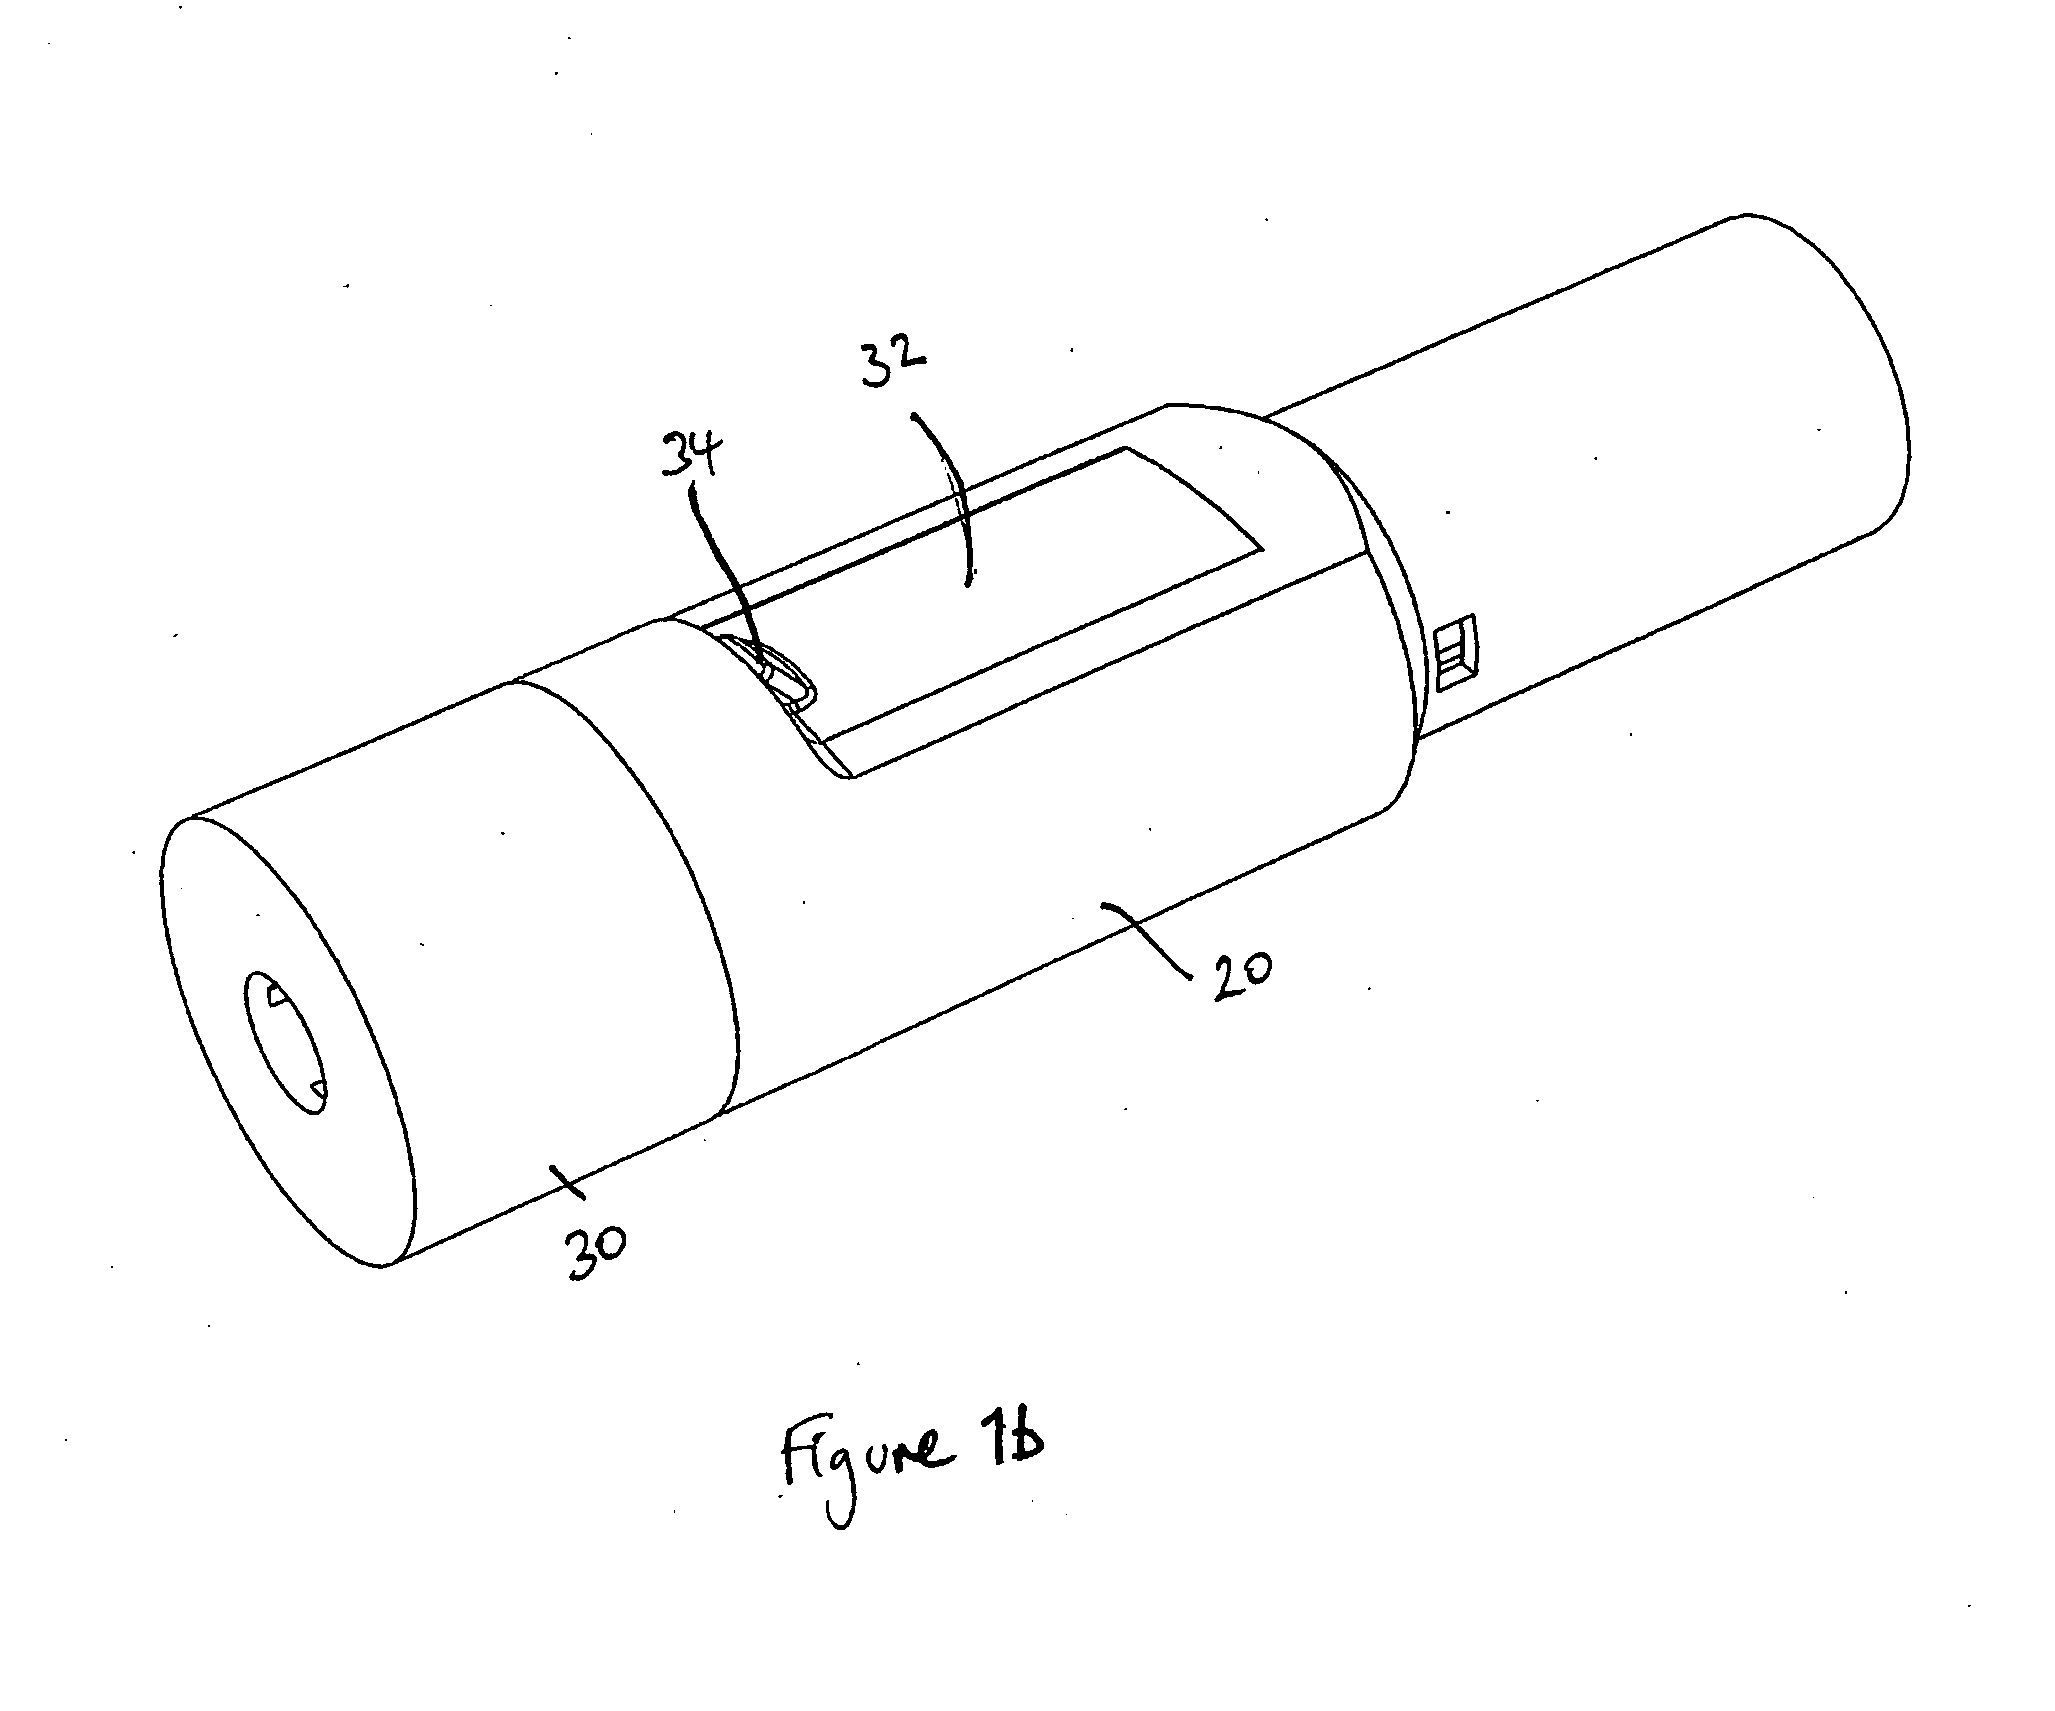 Drive assembly for an autoinjector and a method of assembling an autoinjector